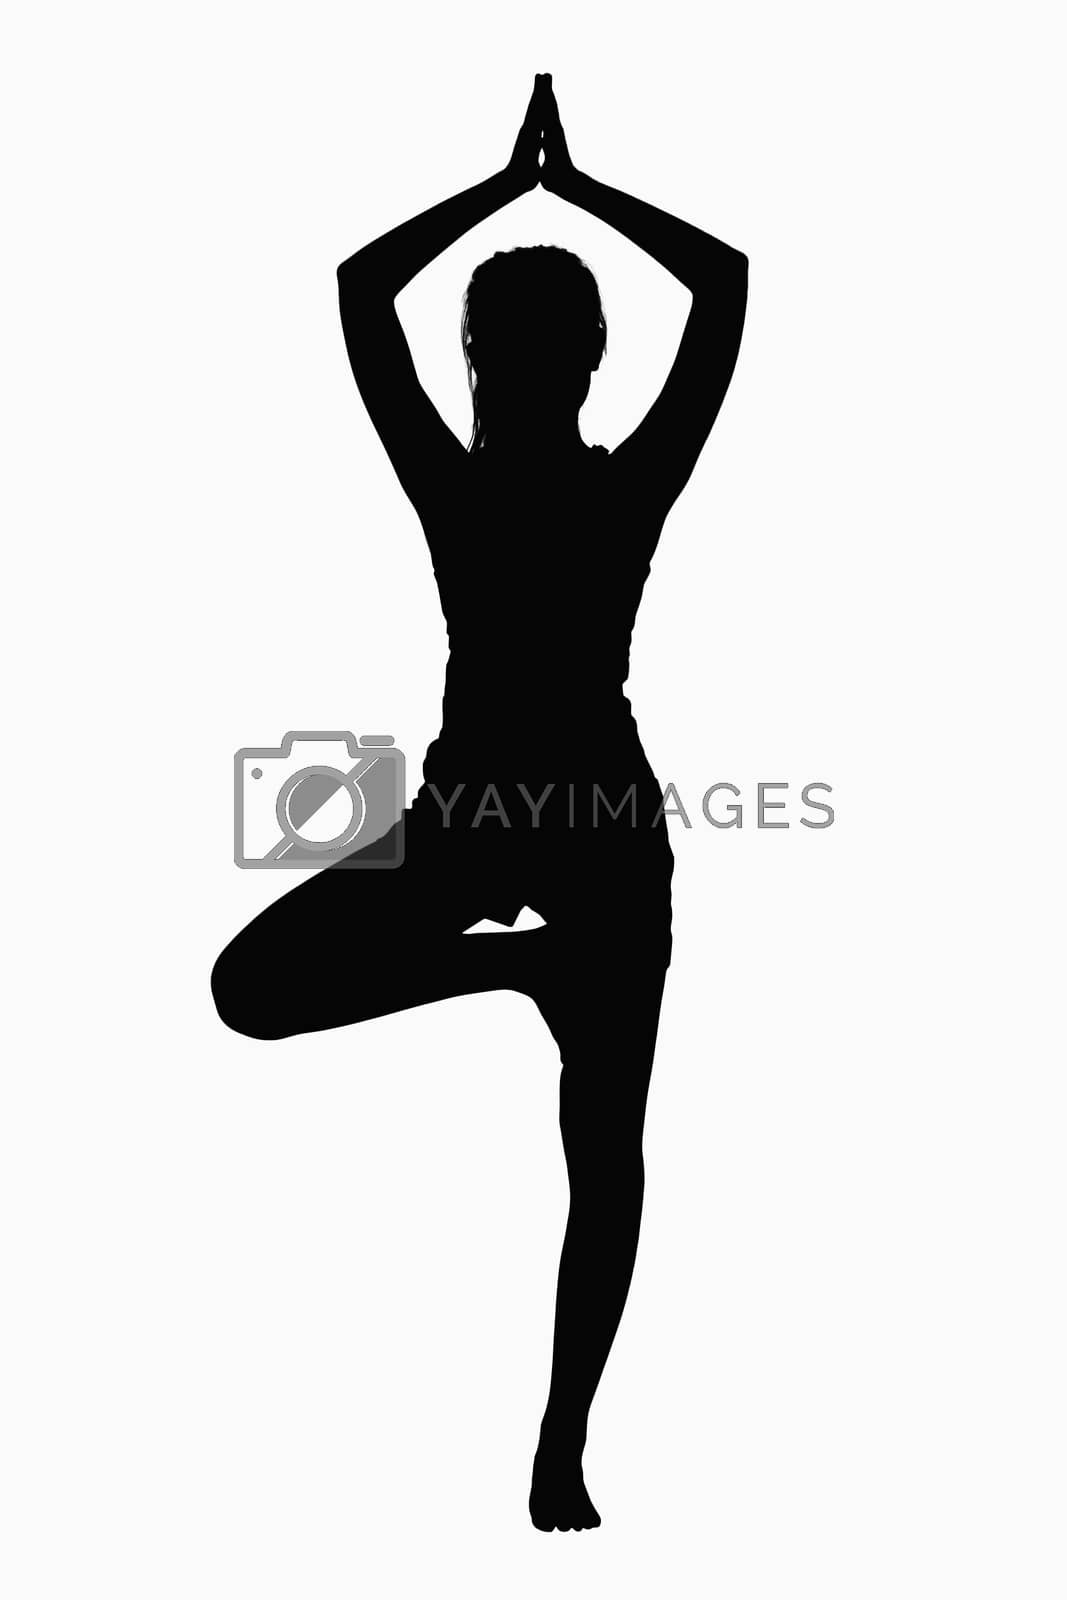 Royalty free image of Silhouette of woman doing yoga pose. by XiXinXing